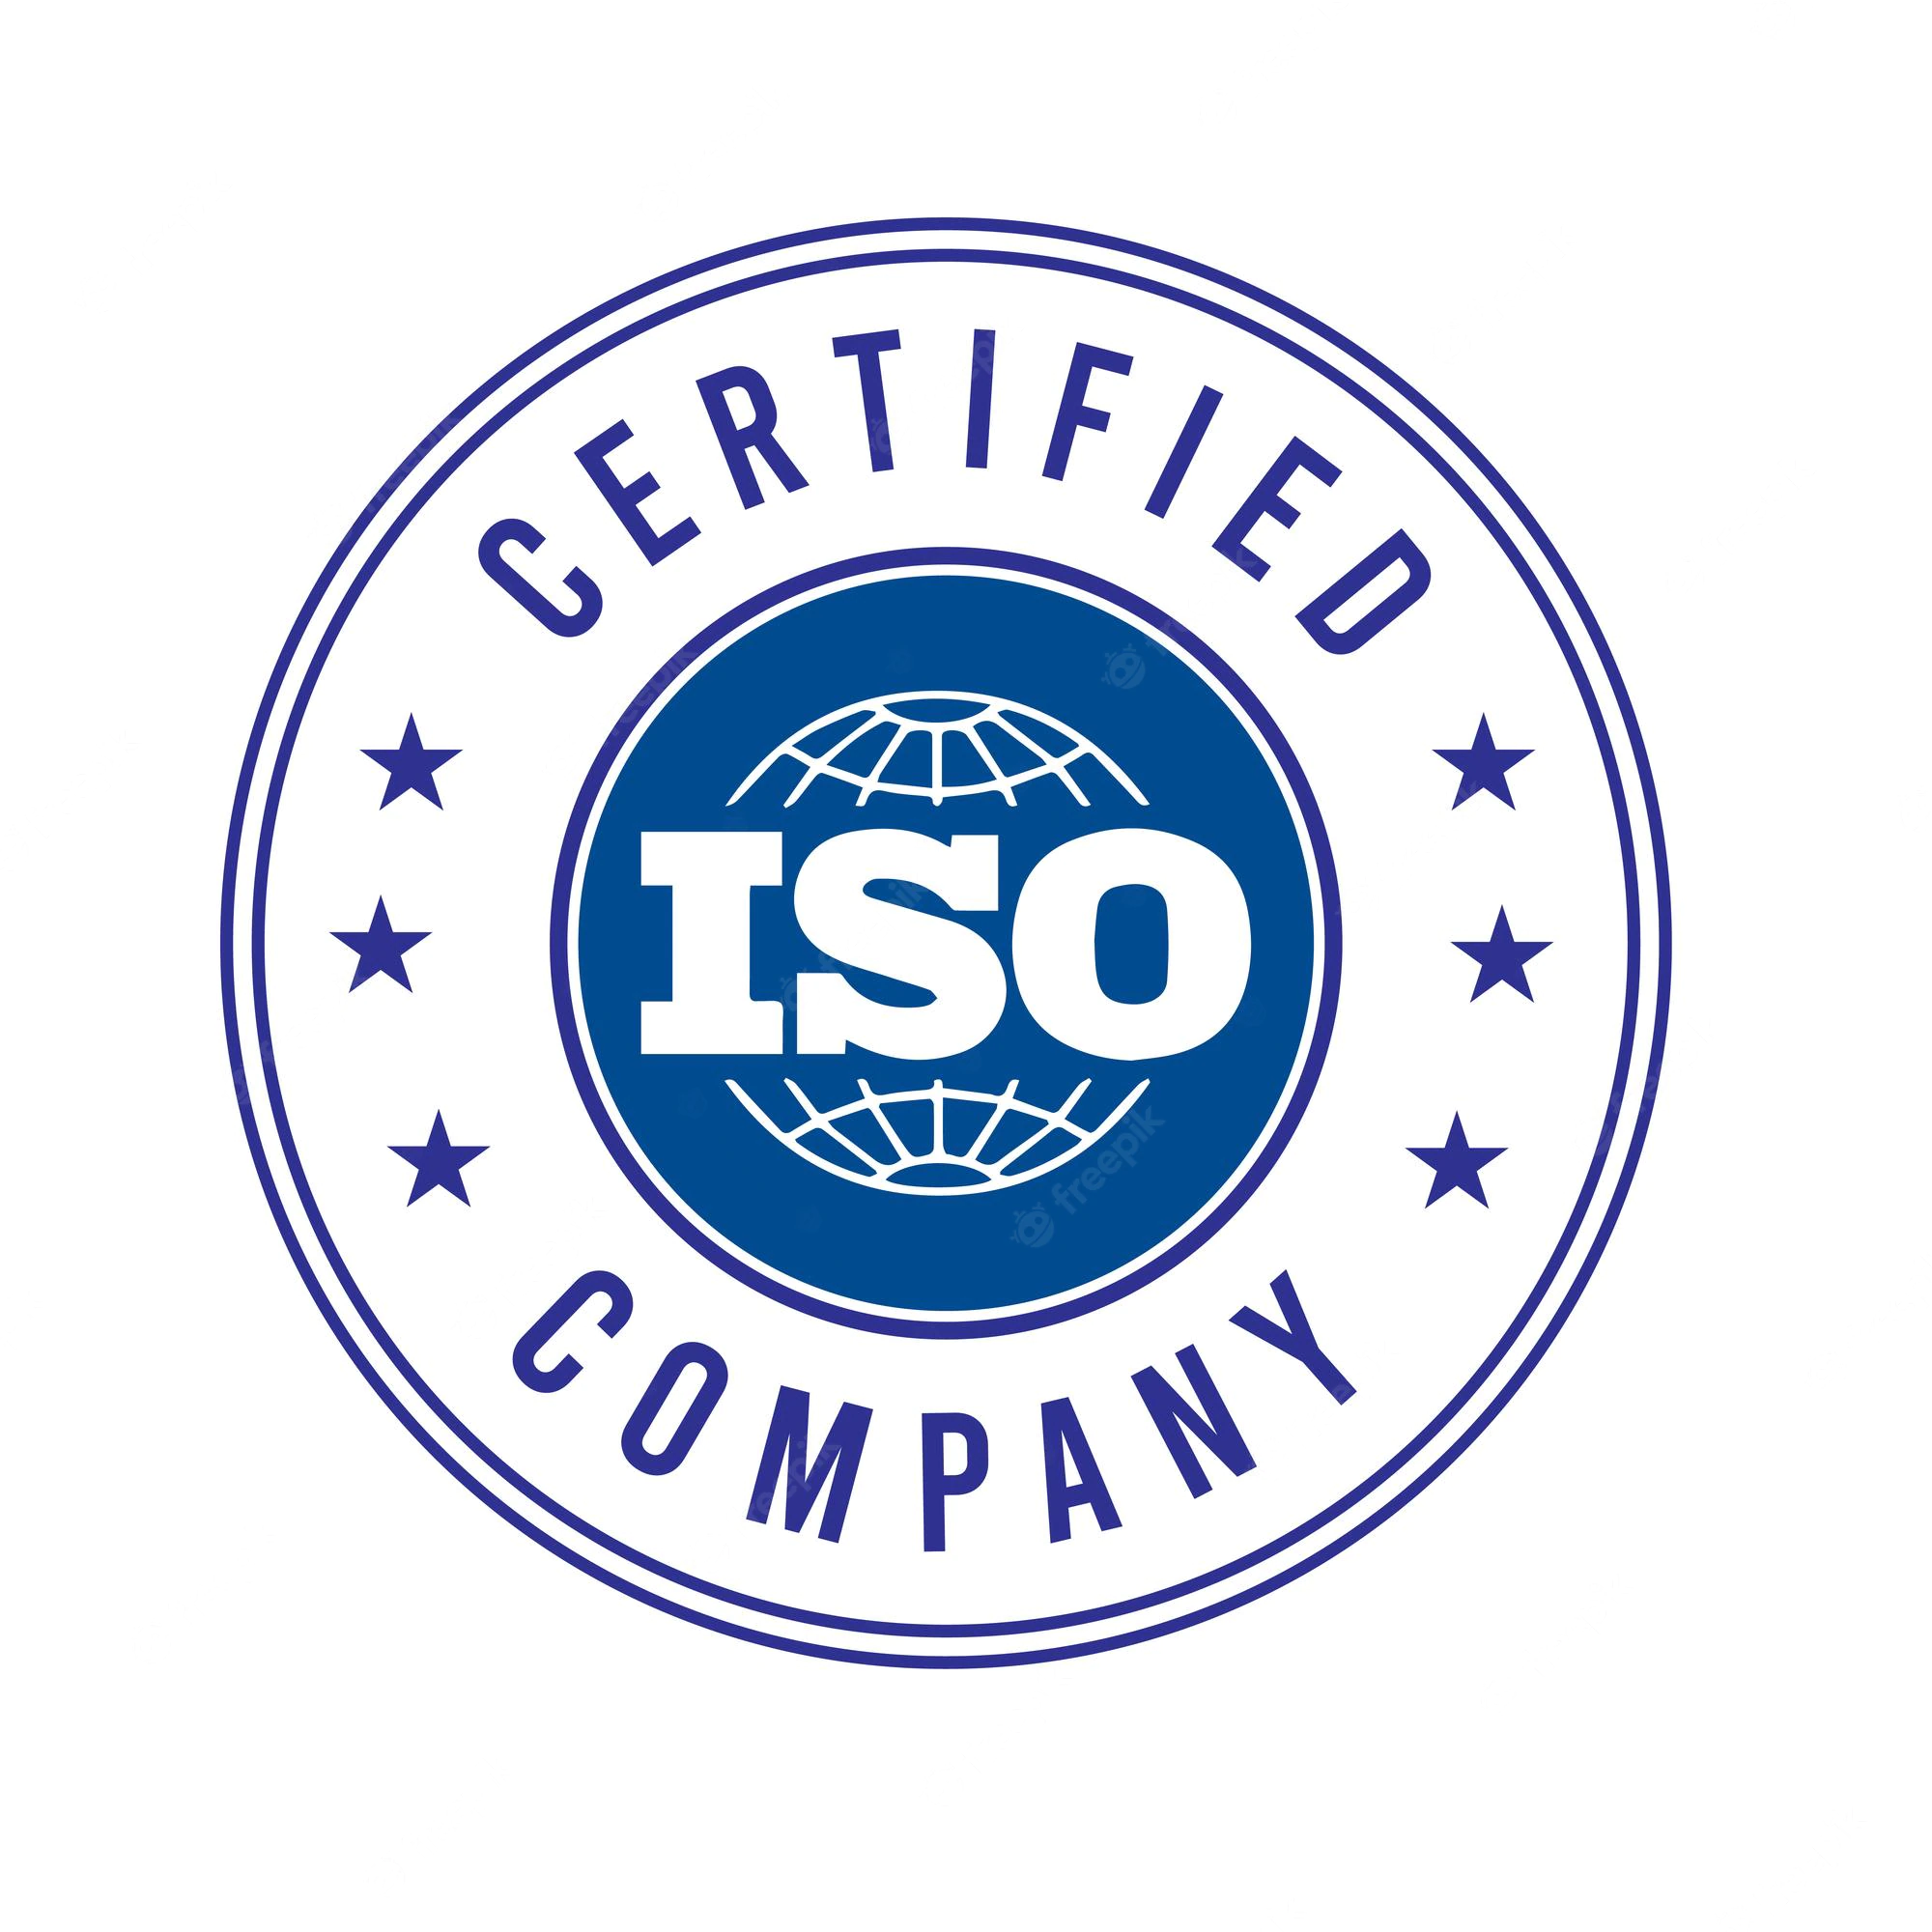 How long does it take to achieve ISO Certification?